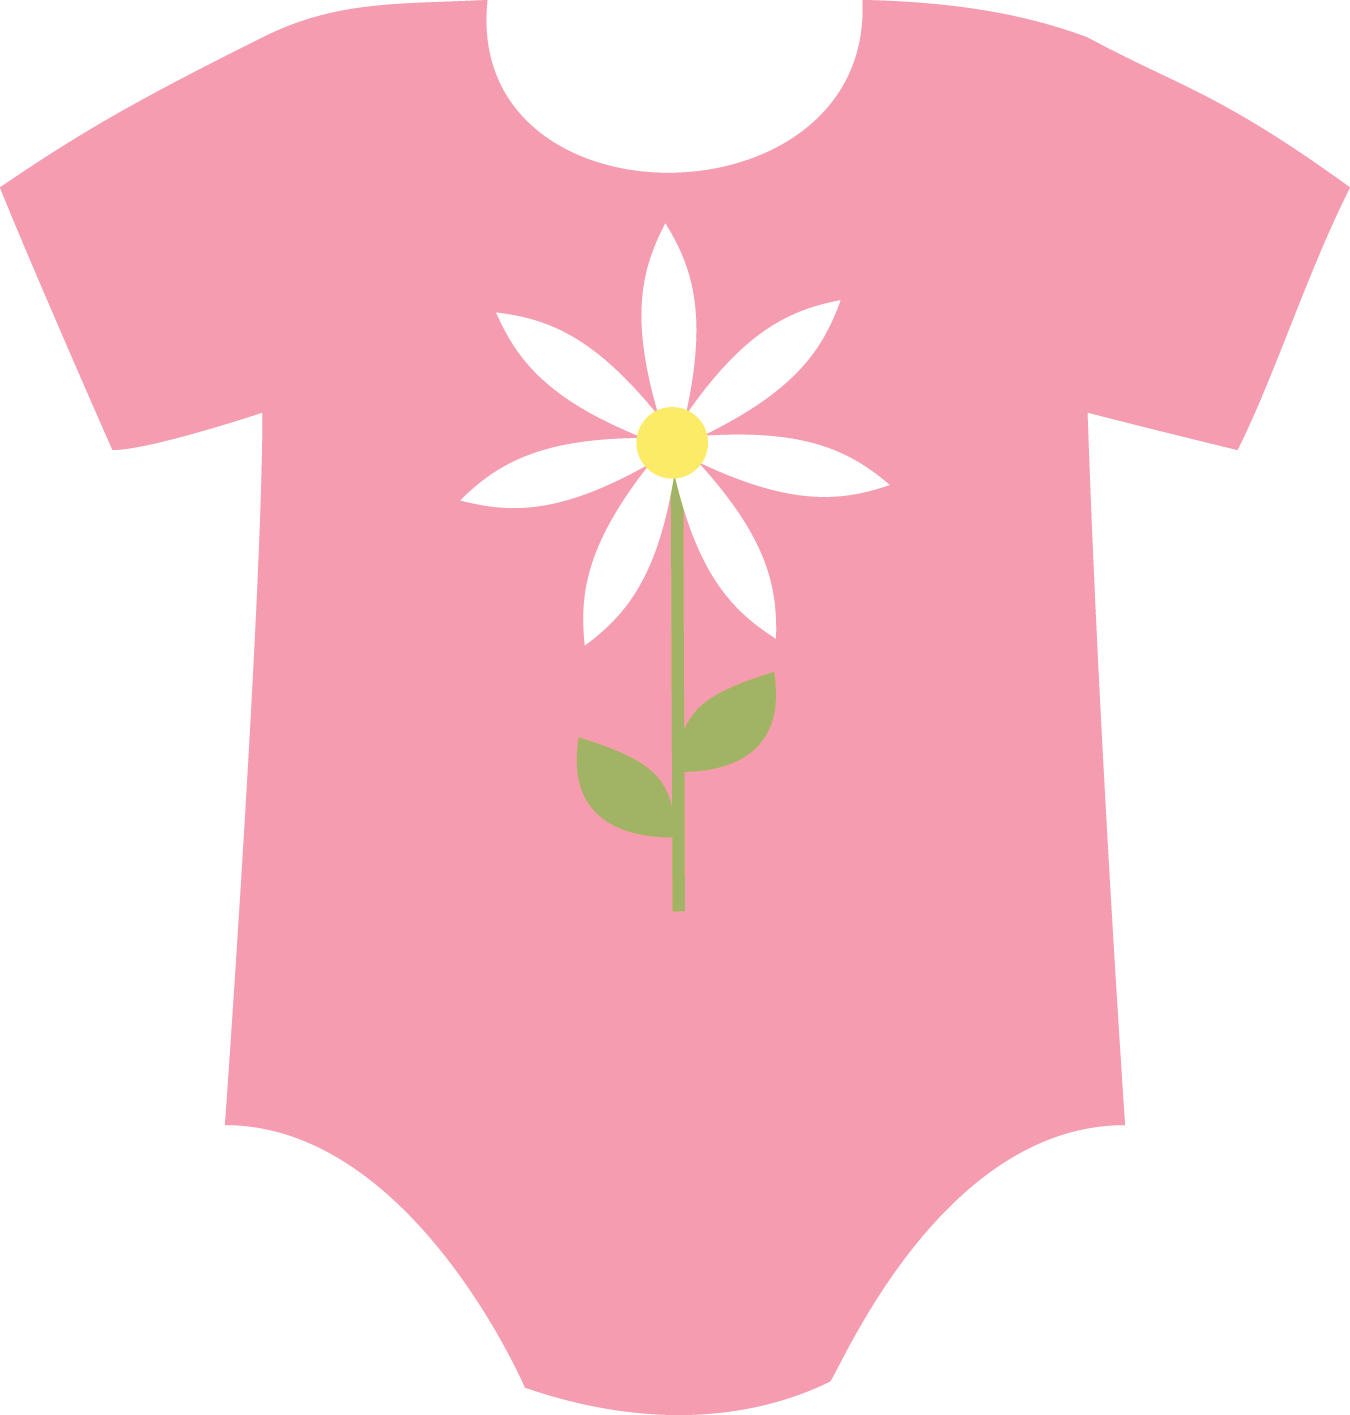 Pin clipart onesie, Pin onesie Transparent FREE for download